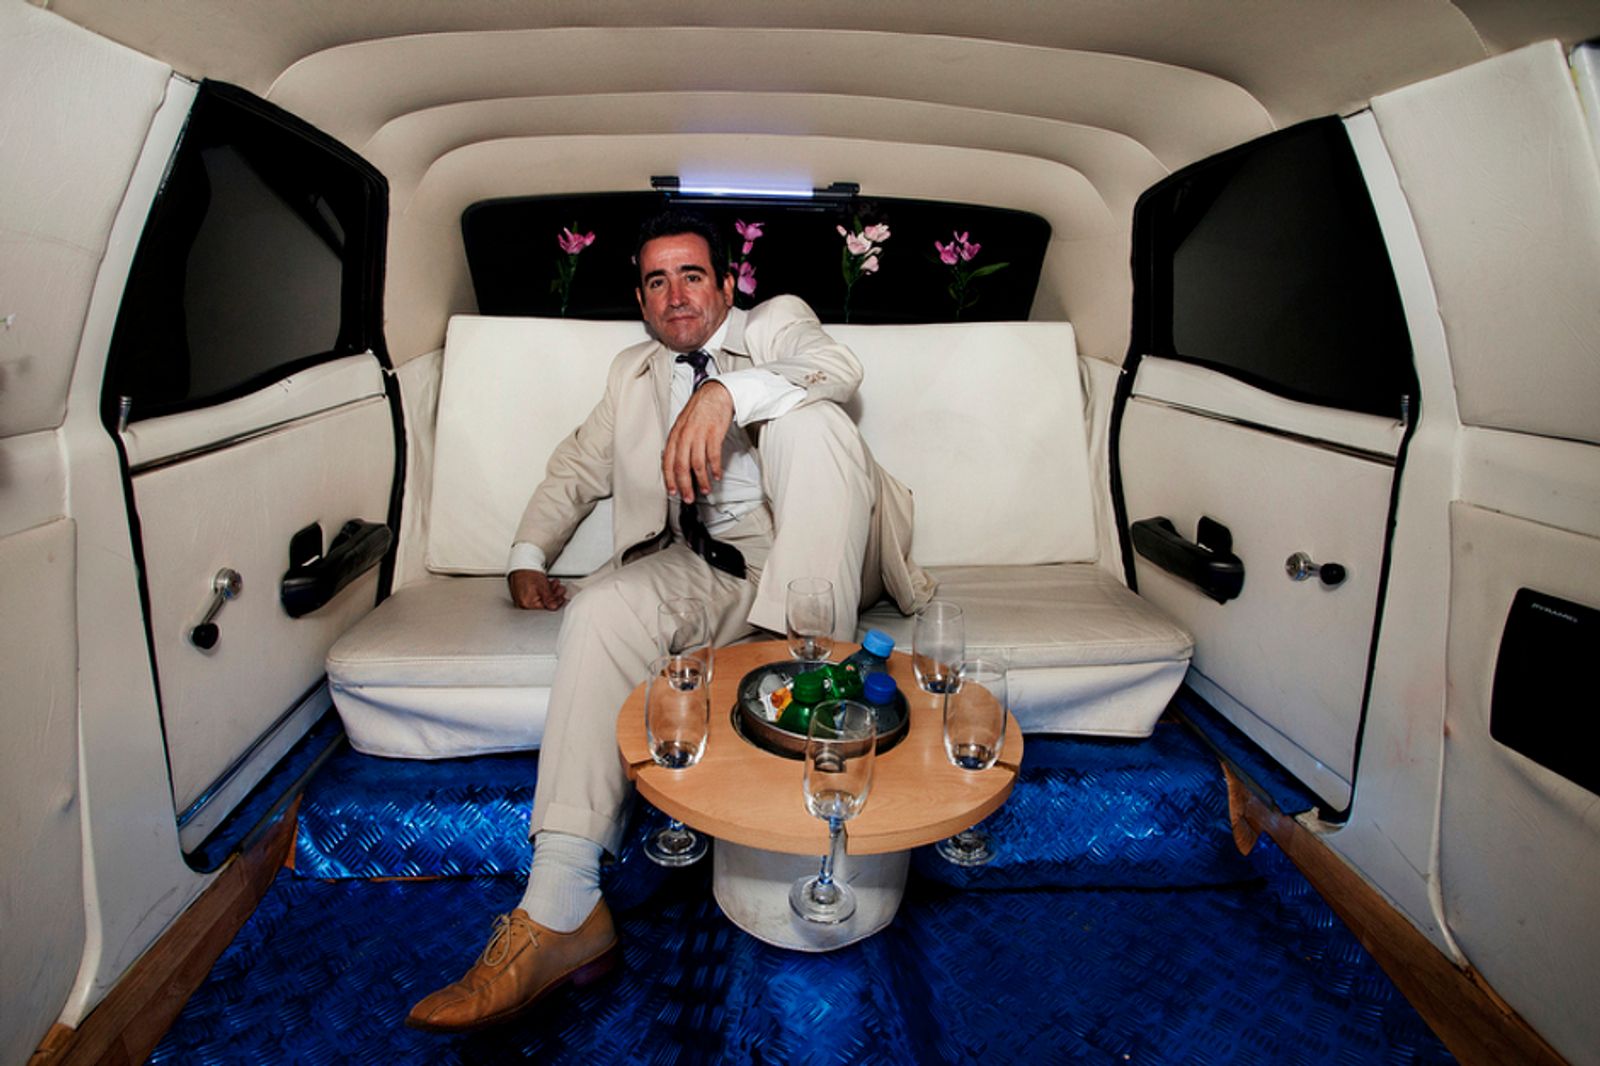 © Myriam Meloni - Jhonni, the owner of the limousine. Renting the limousine costs about 400 pesos ( 50 USD) per hour.